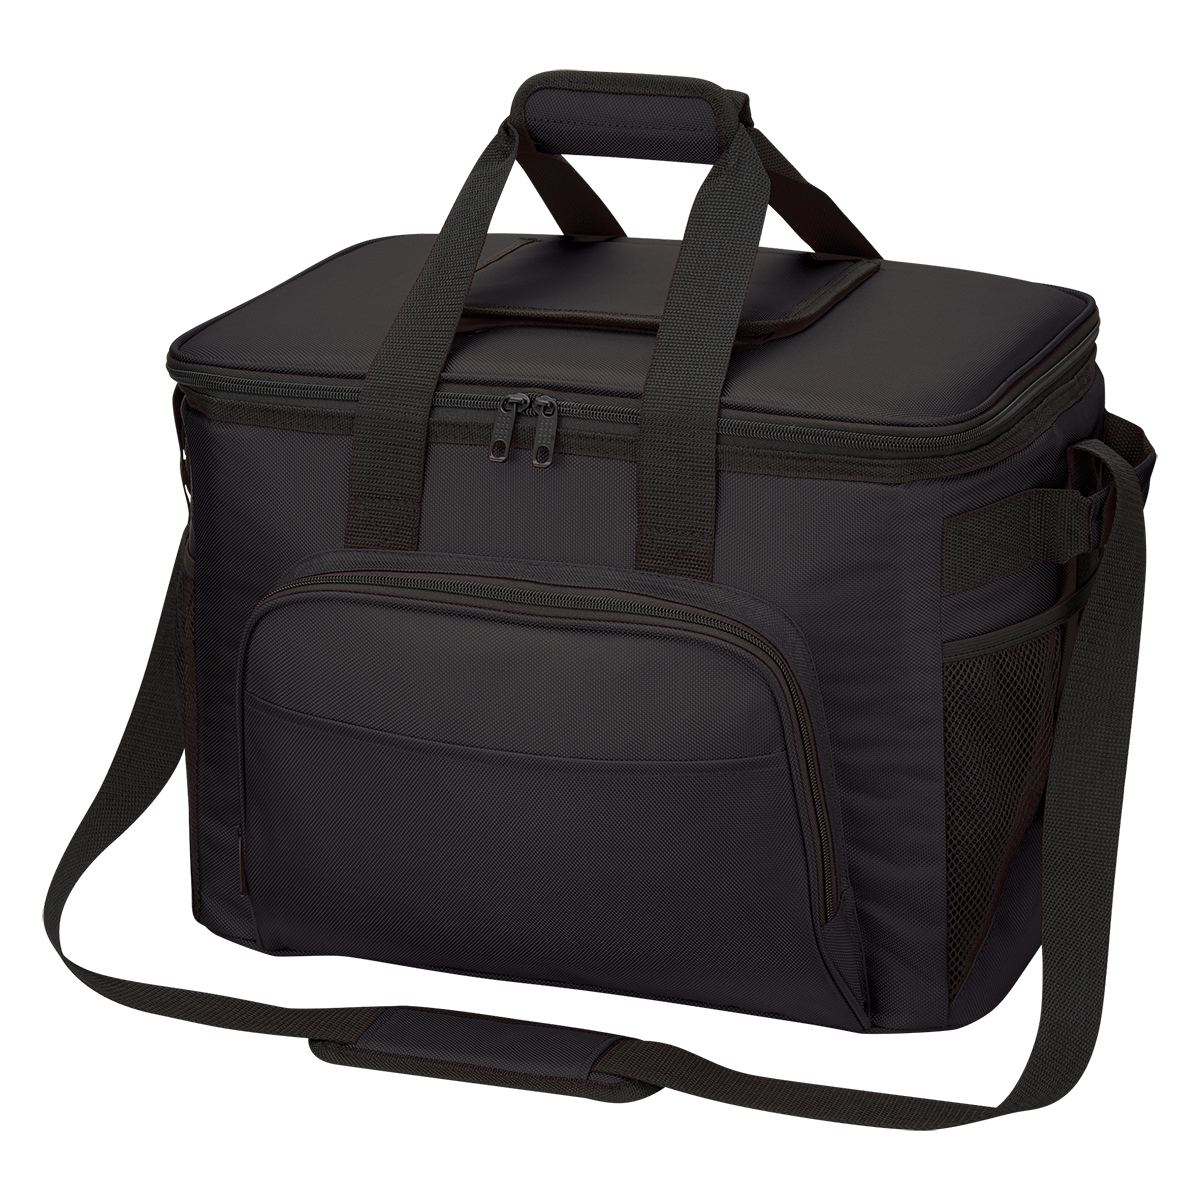 #400 Tailgate Mate Cooler Bag - Hit Promotional Products